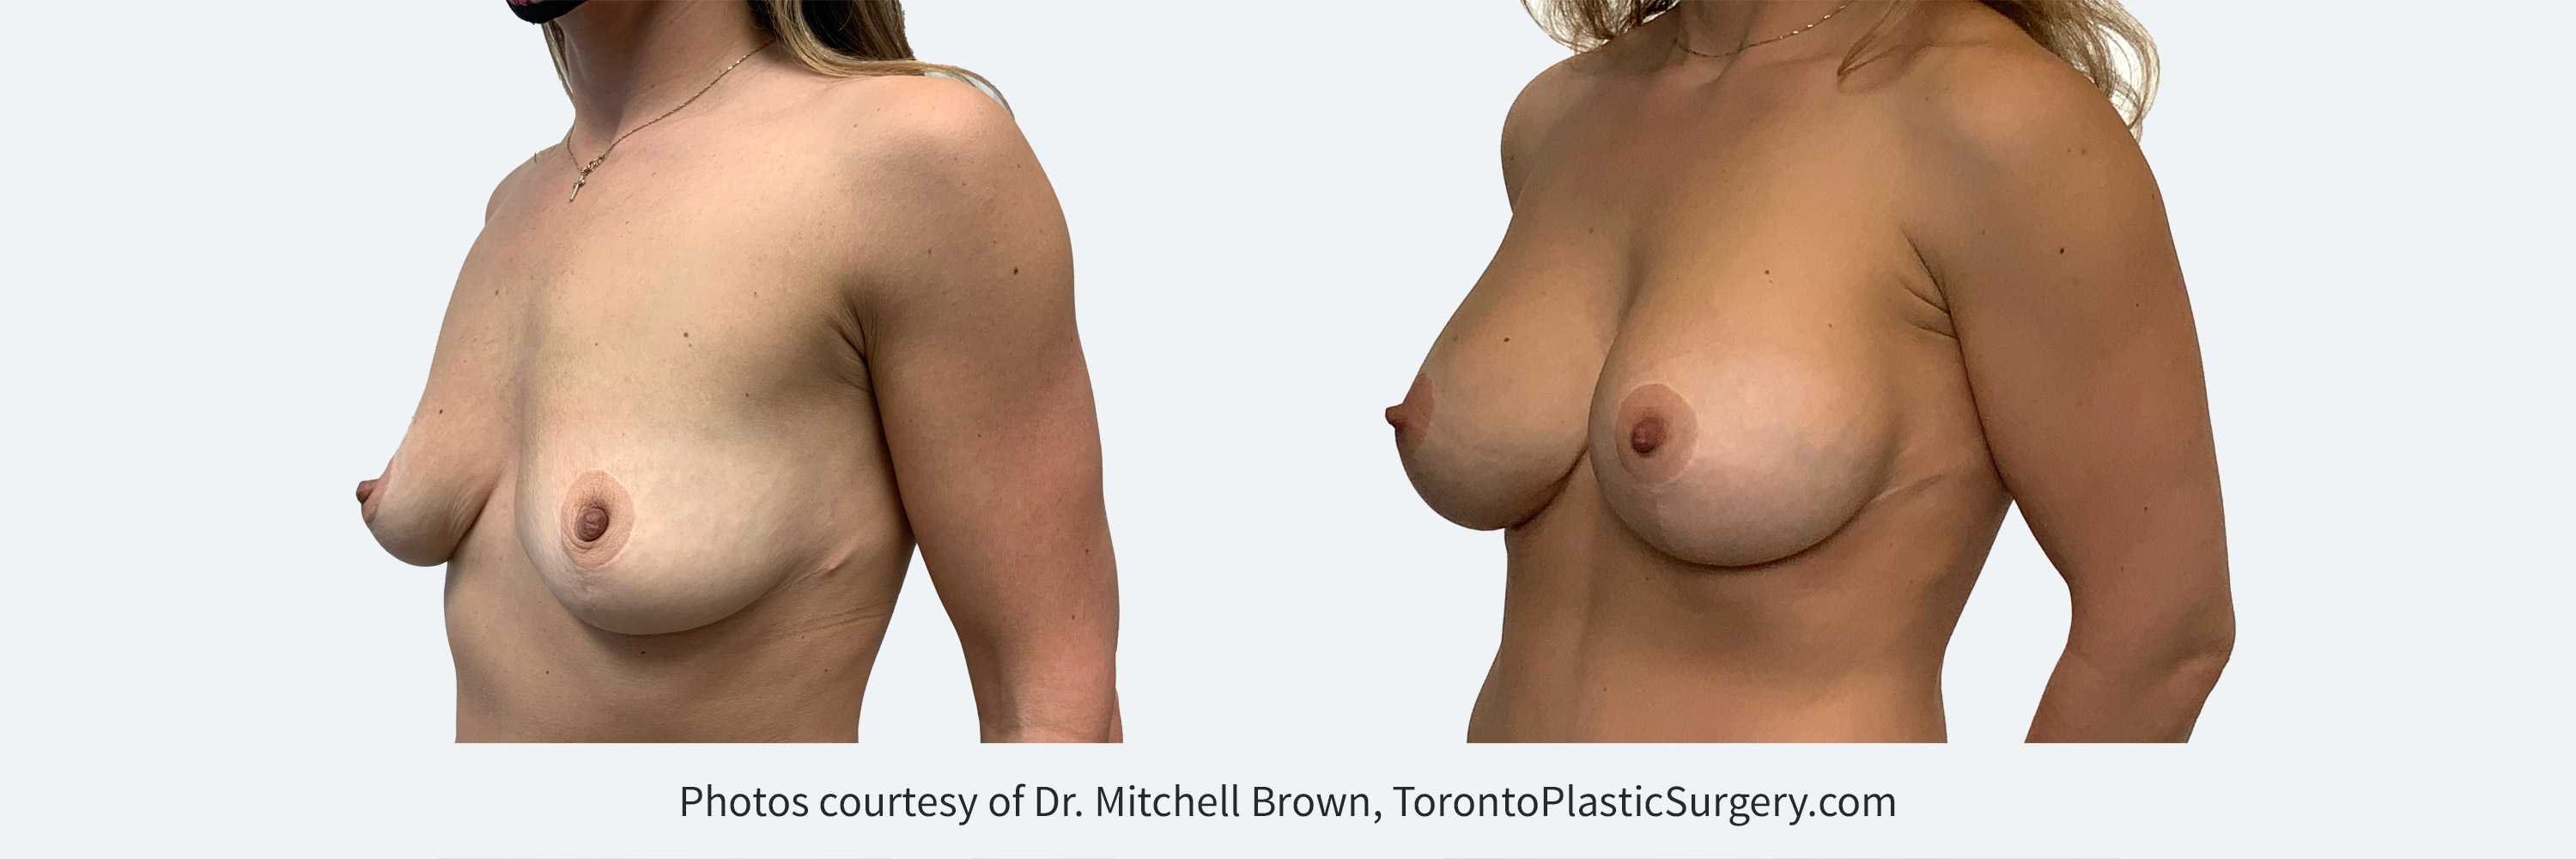 Previous breast reduction, lost weight and now desires implants. Before and 6 month after augmentation with 425cc implants.